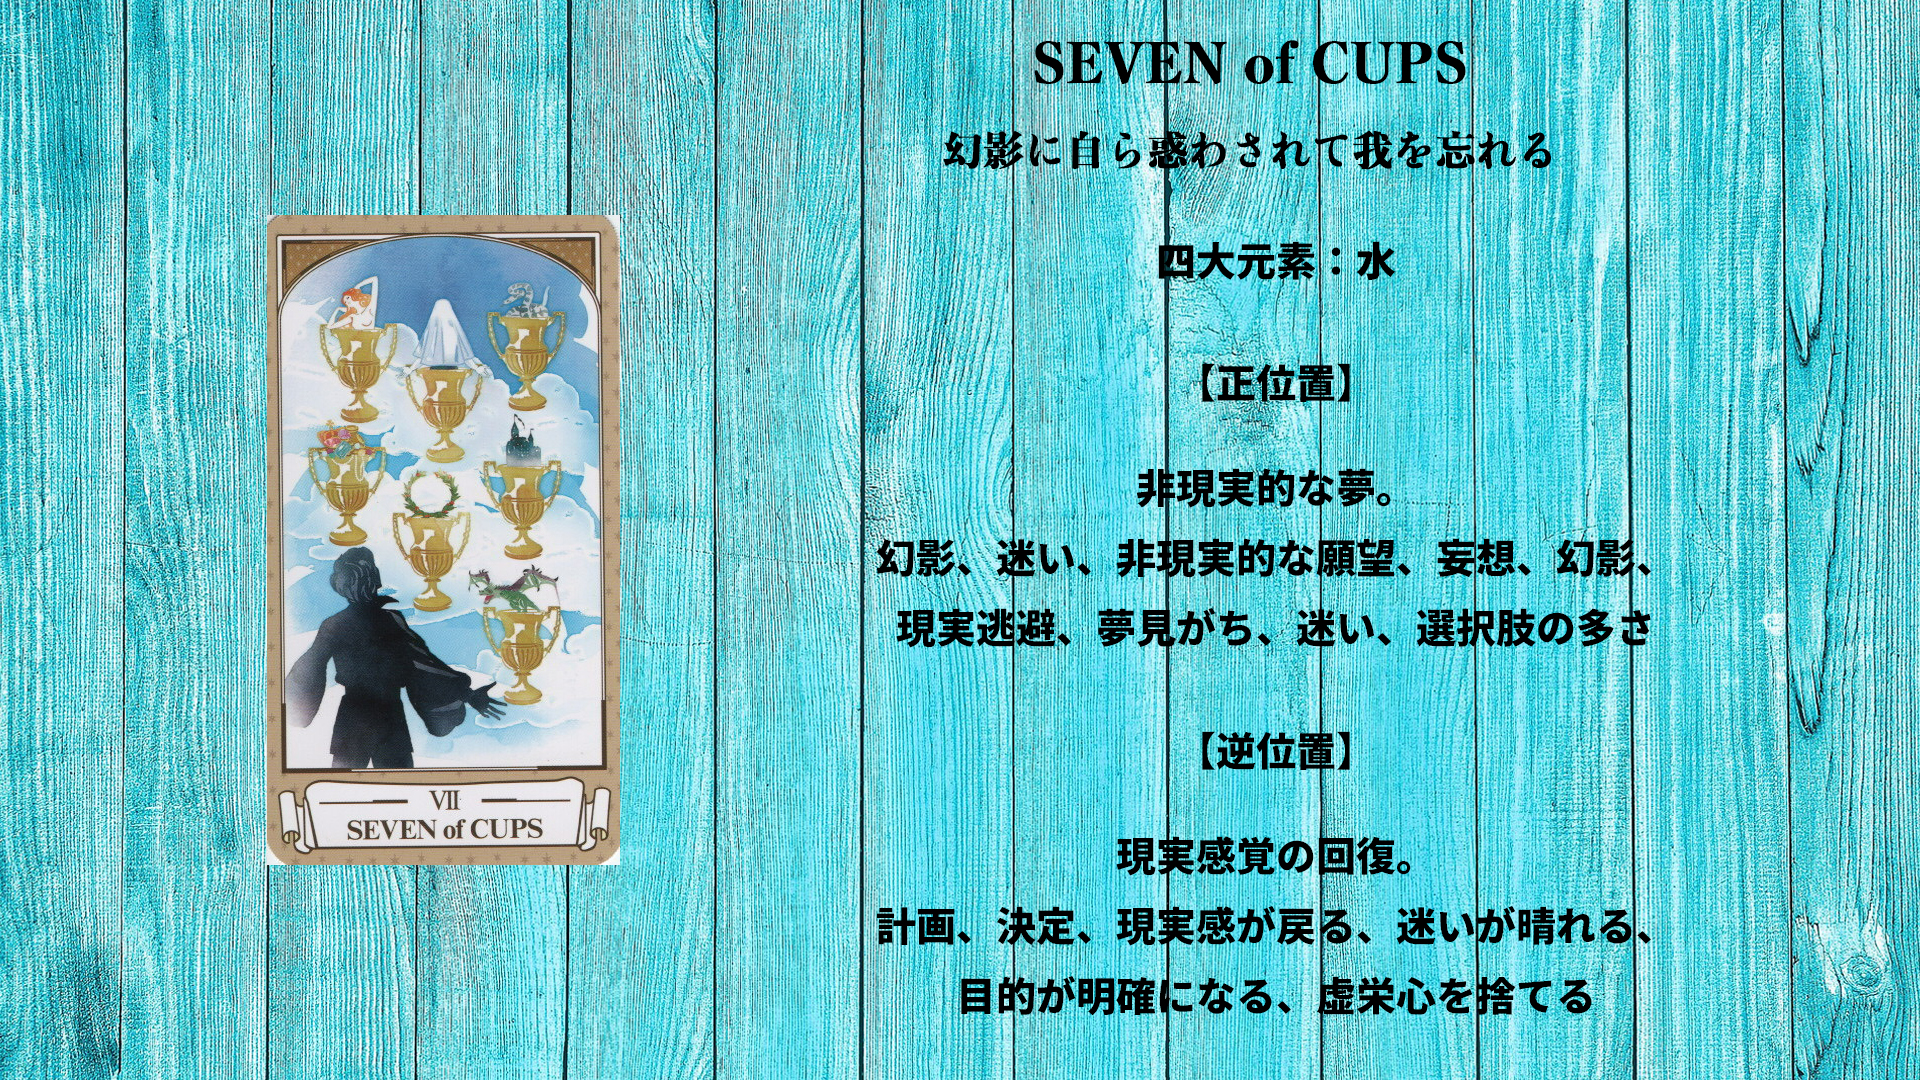 SEVEN of CUPS